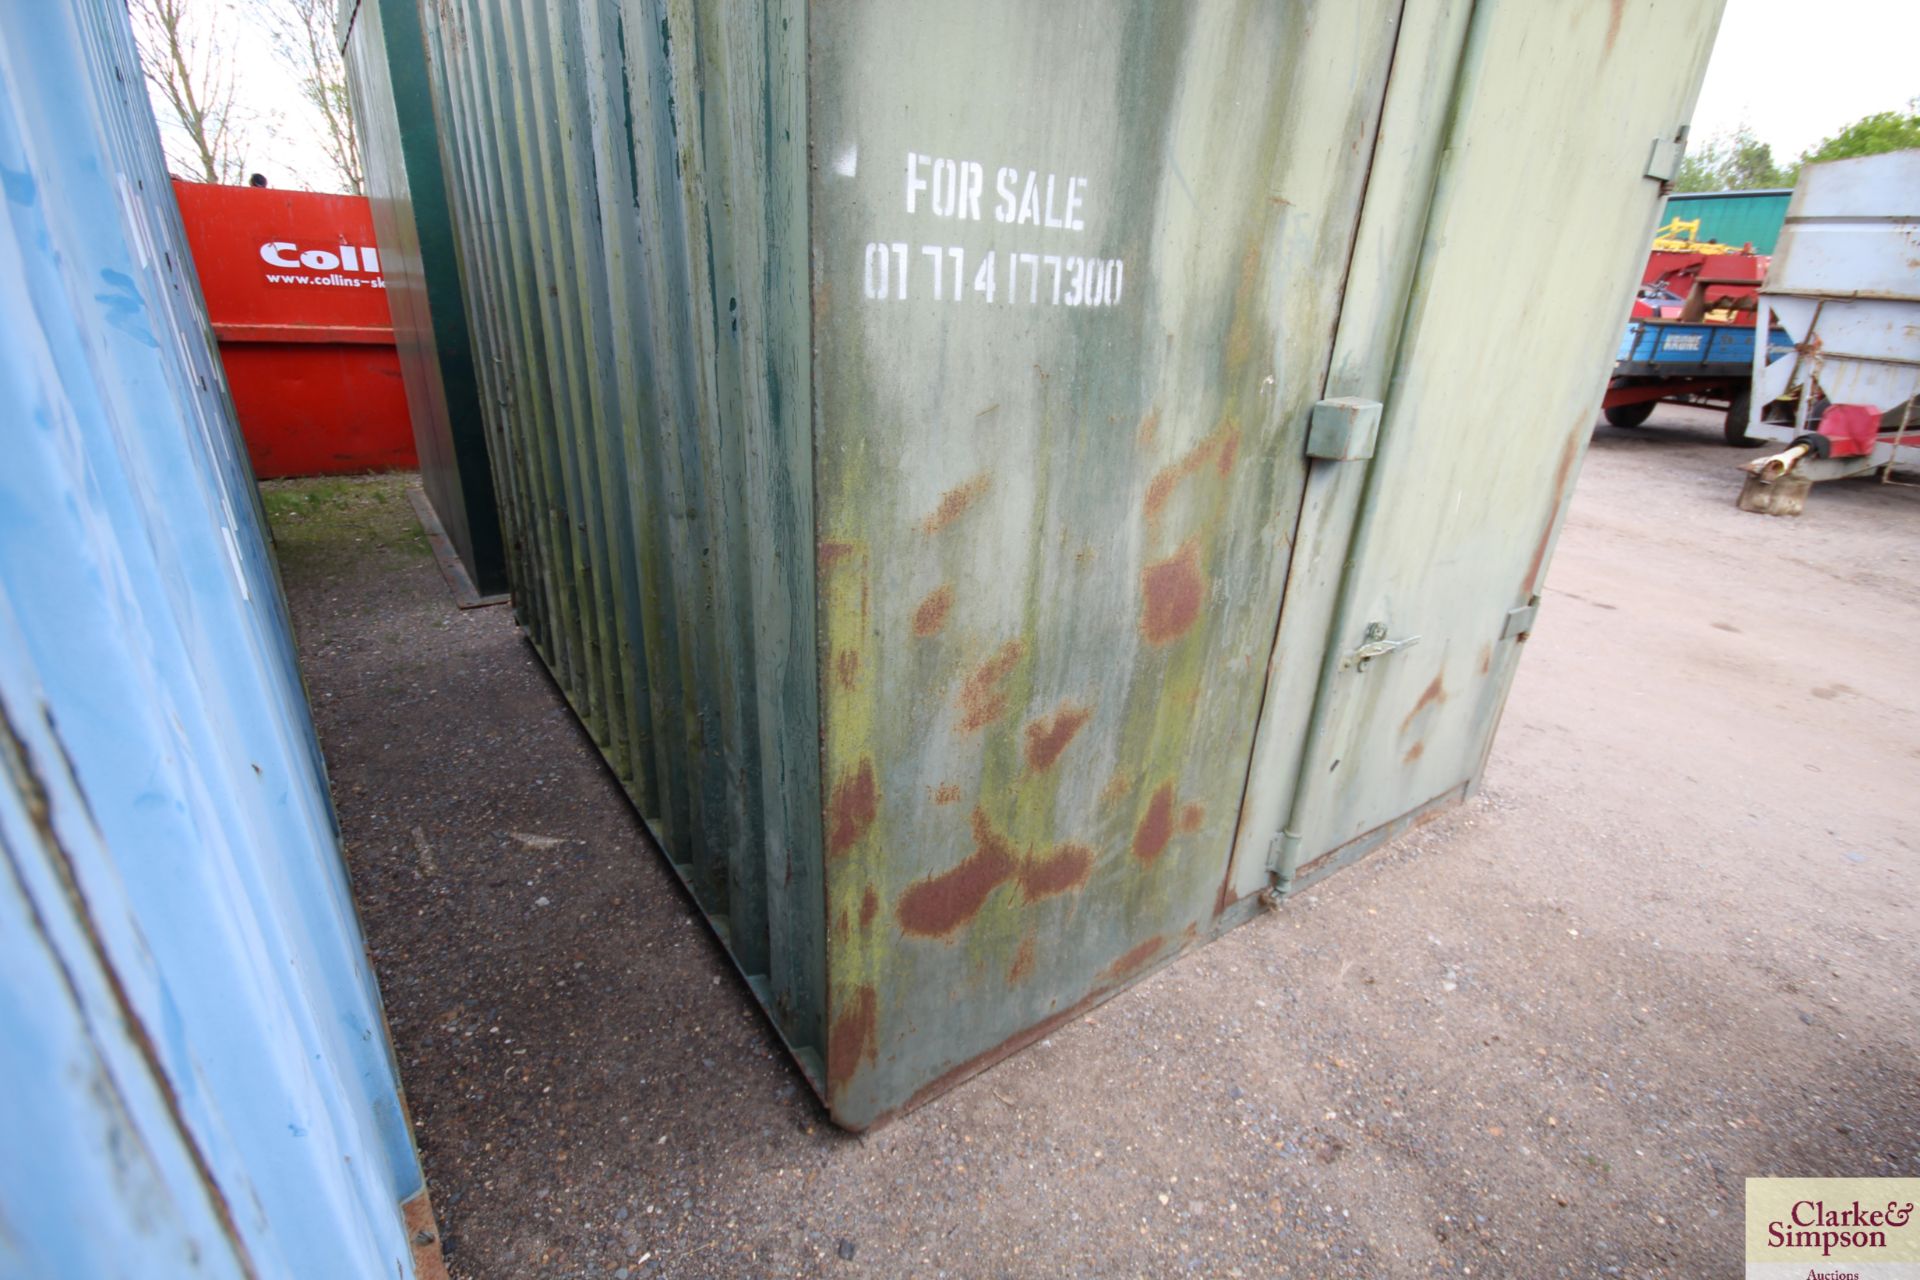 10ft storage container. - Image 3 of 11